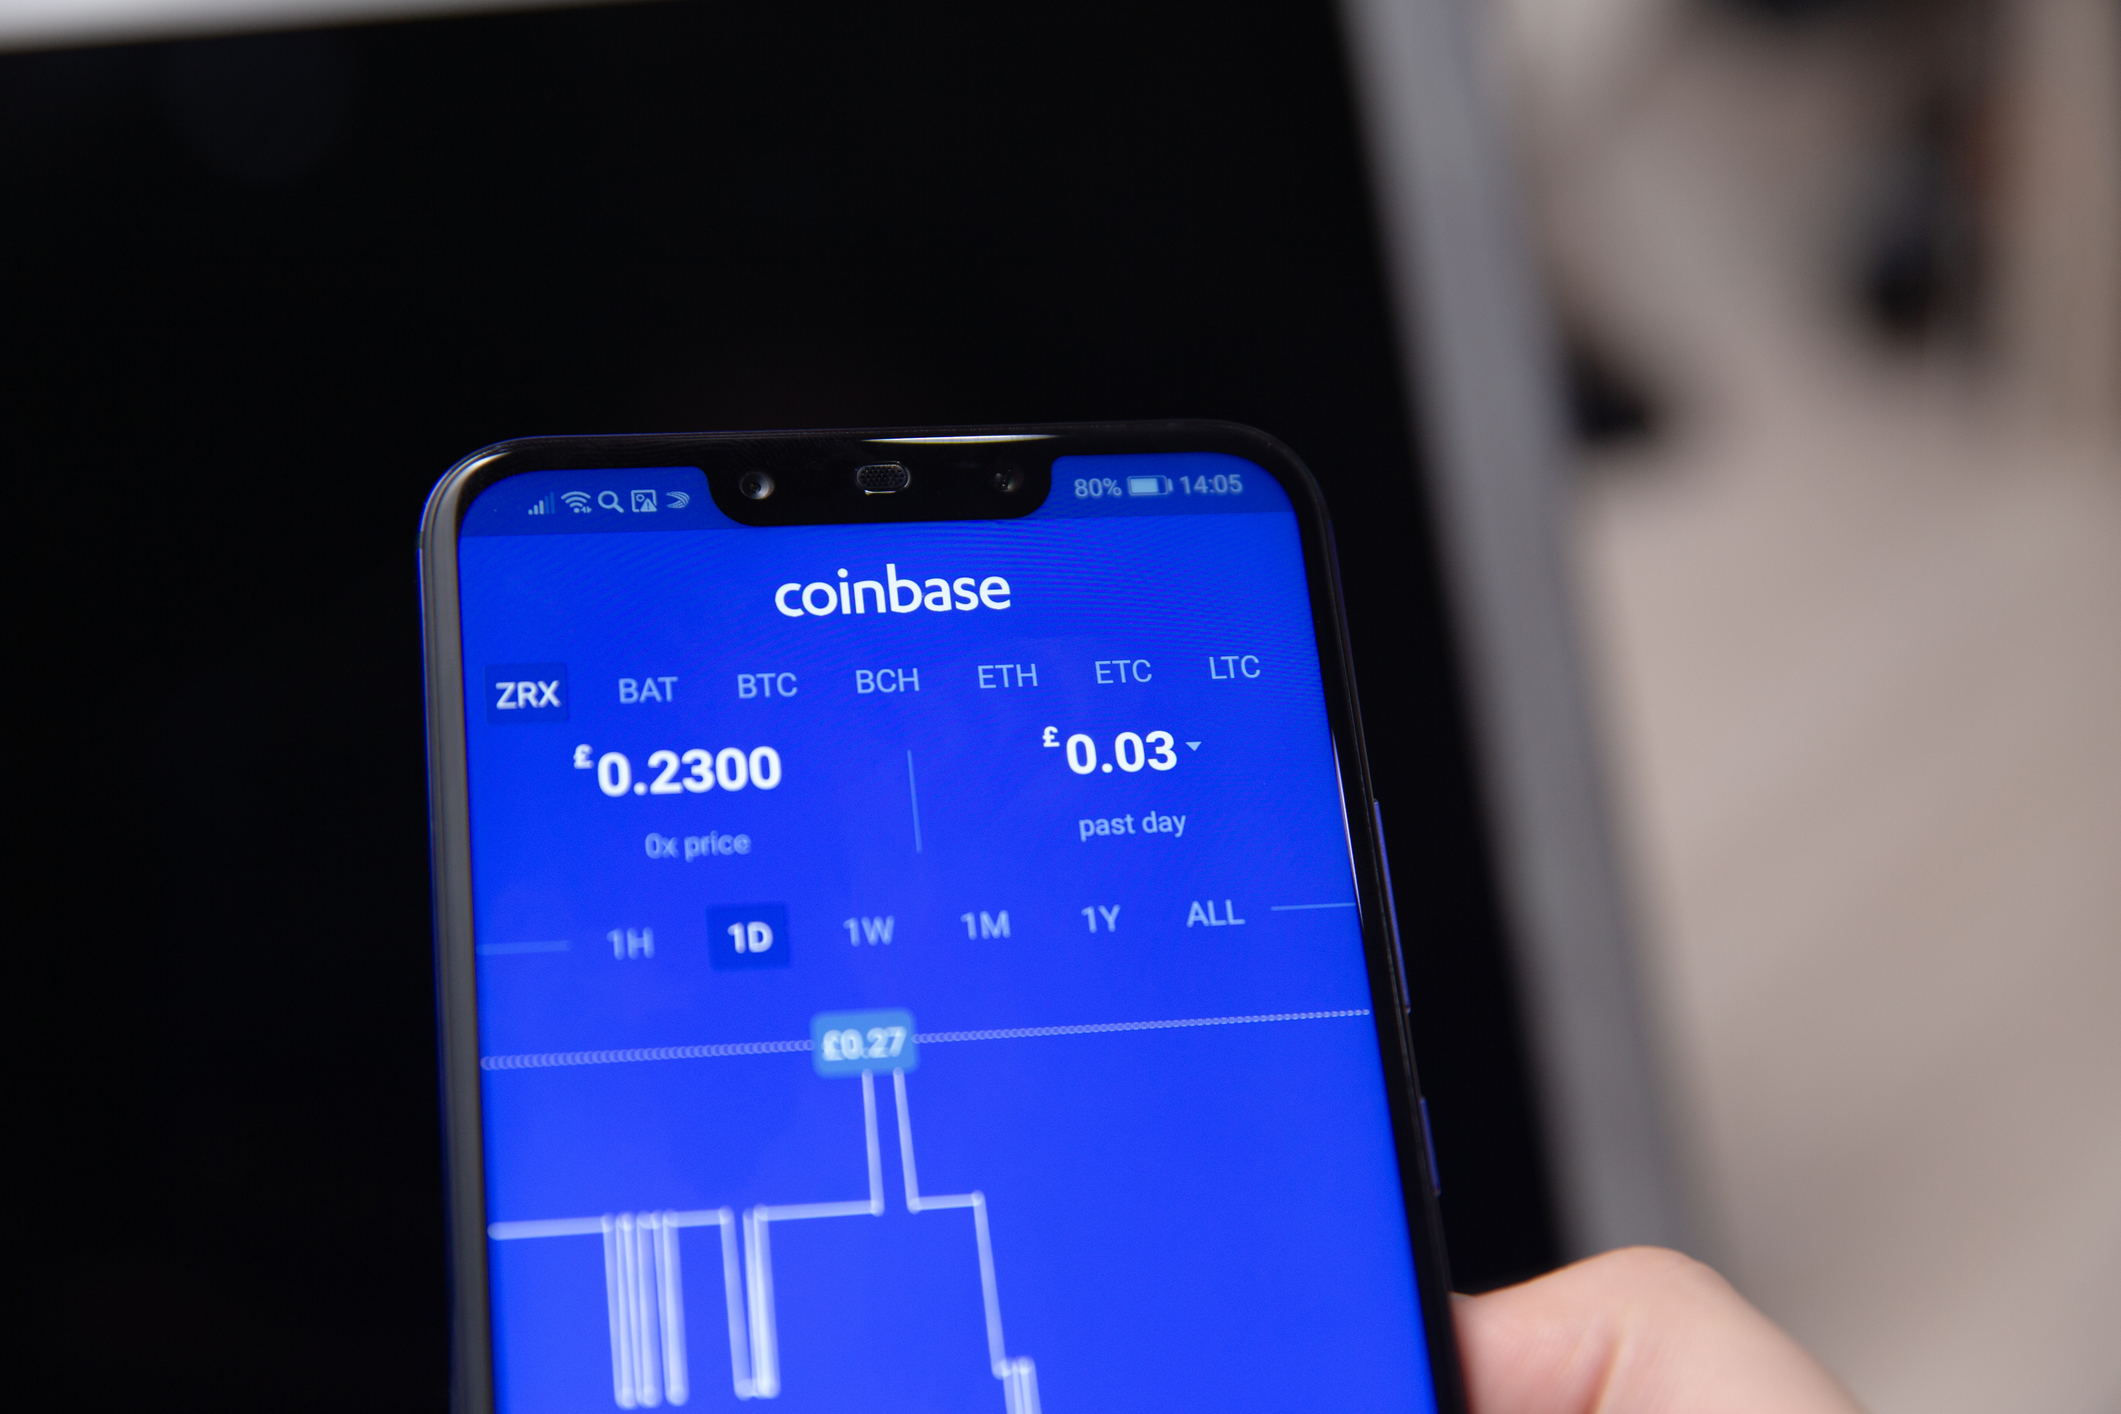 Stellar Lumens (XLM) has been listed on Coinbase